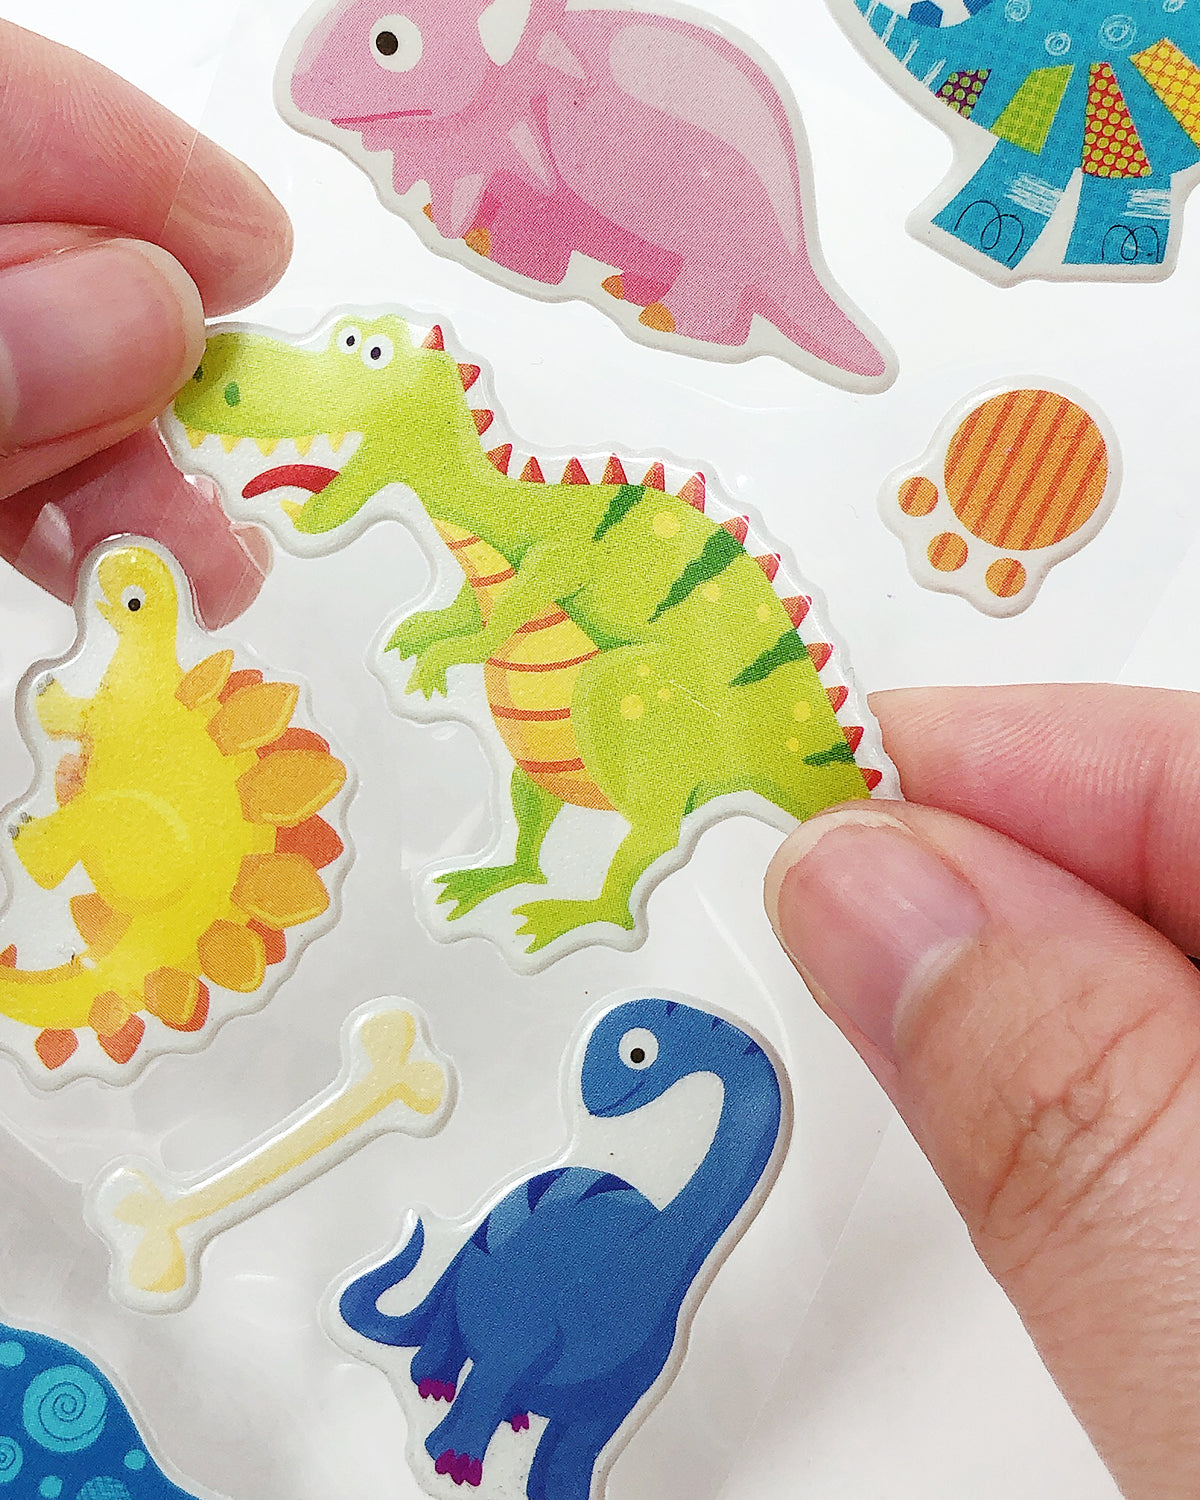 Wrapables 3D Puffy Stickers for Scrapbooking, (10 Sheets) Zoo